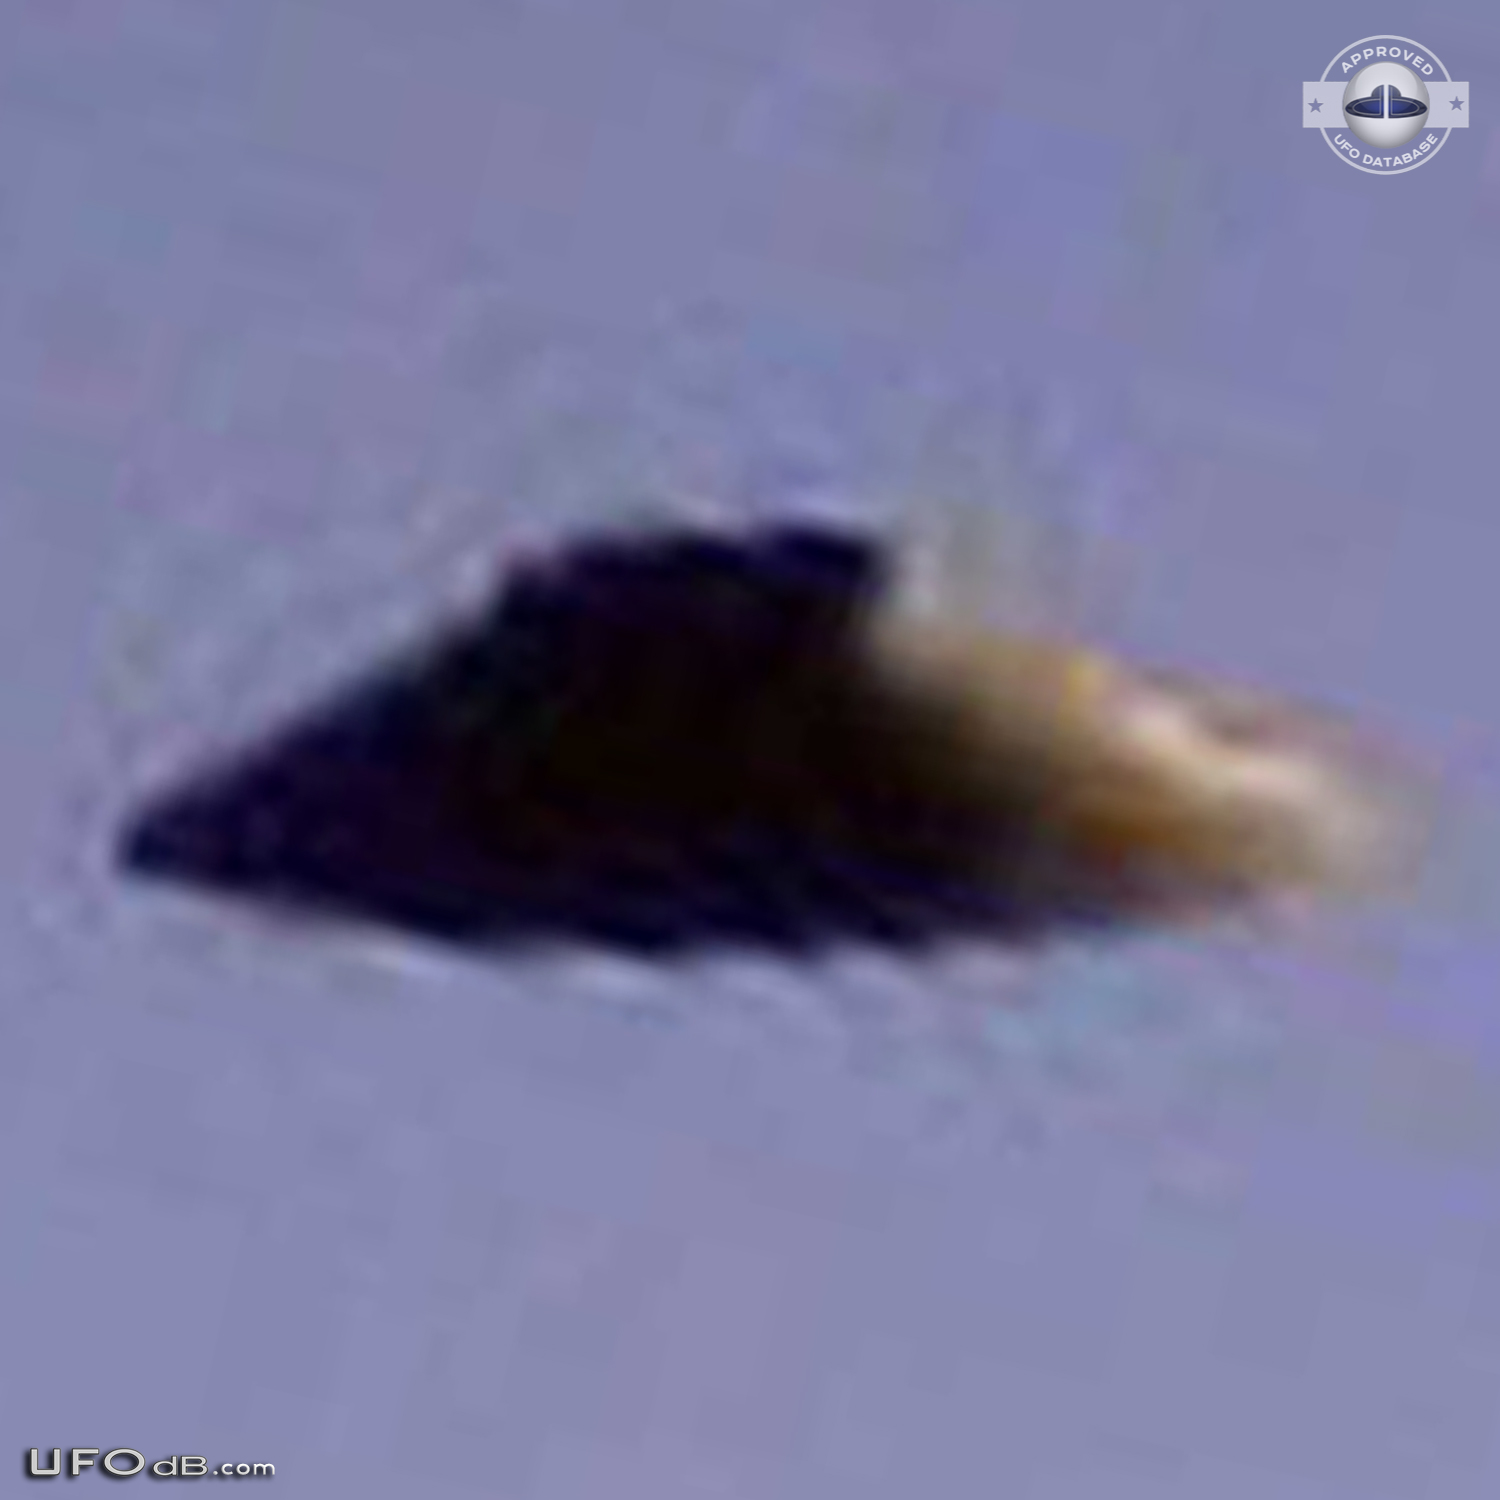 UFO Pictures 2009 UFO over San Diego County California United states. UFO Picture #429-5